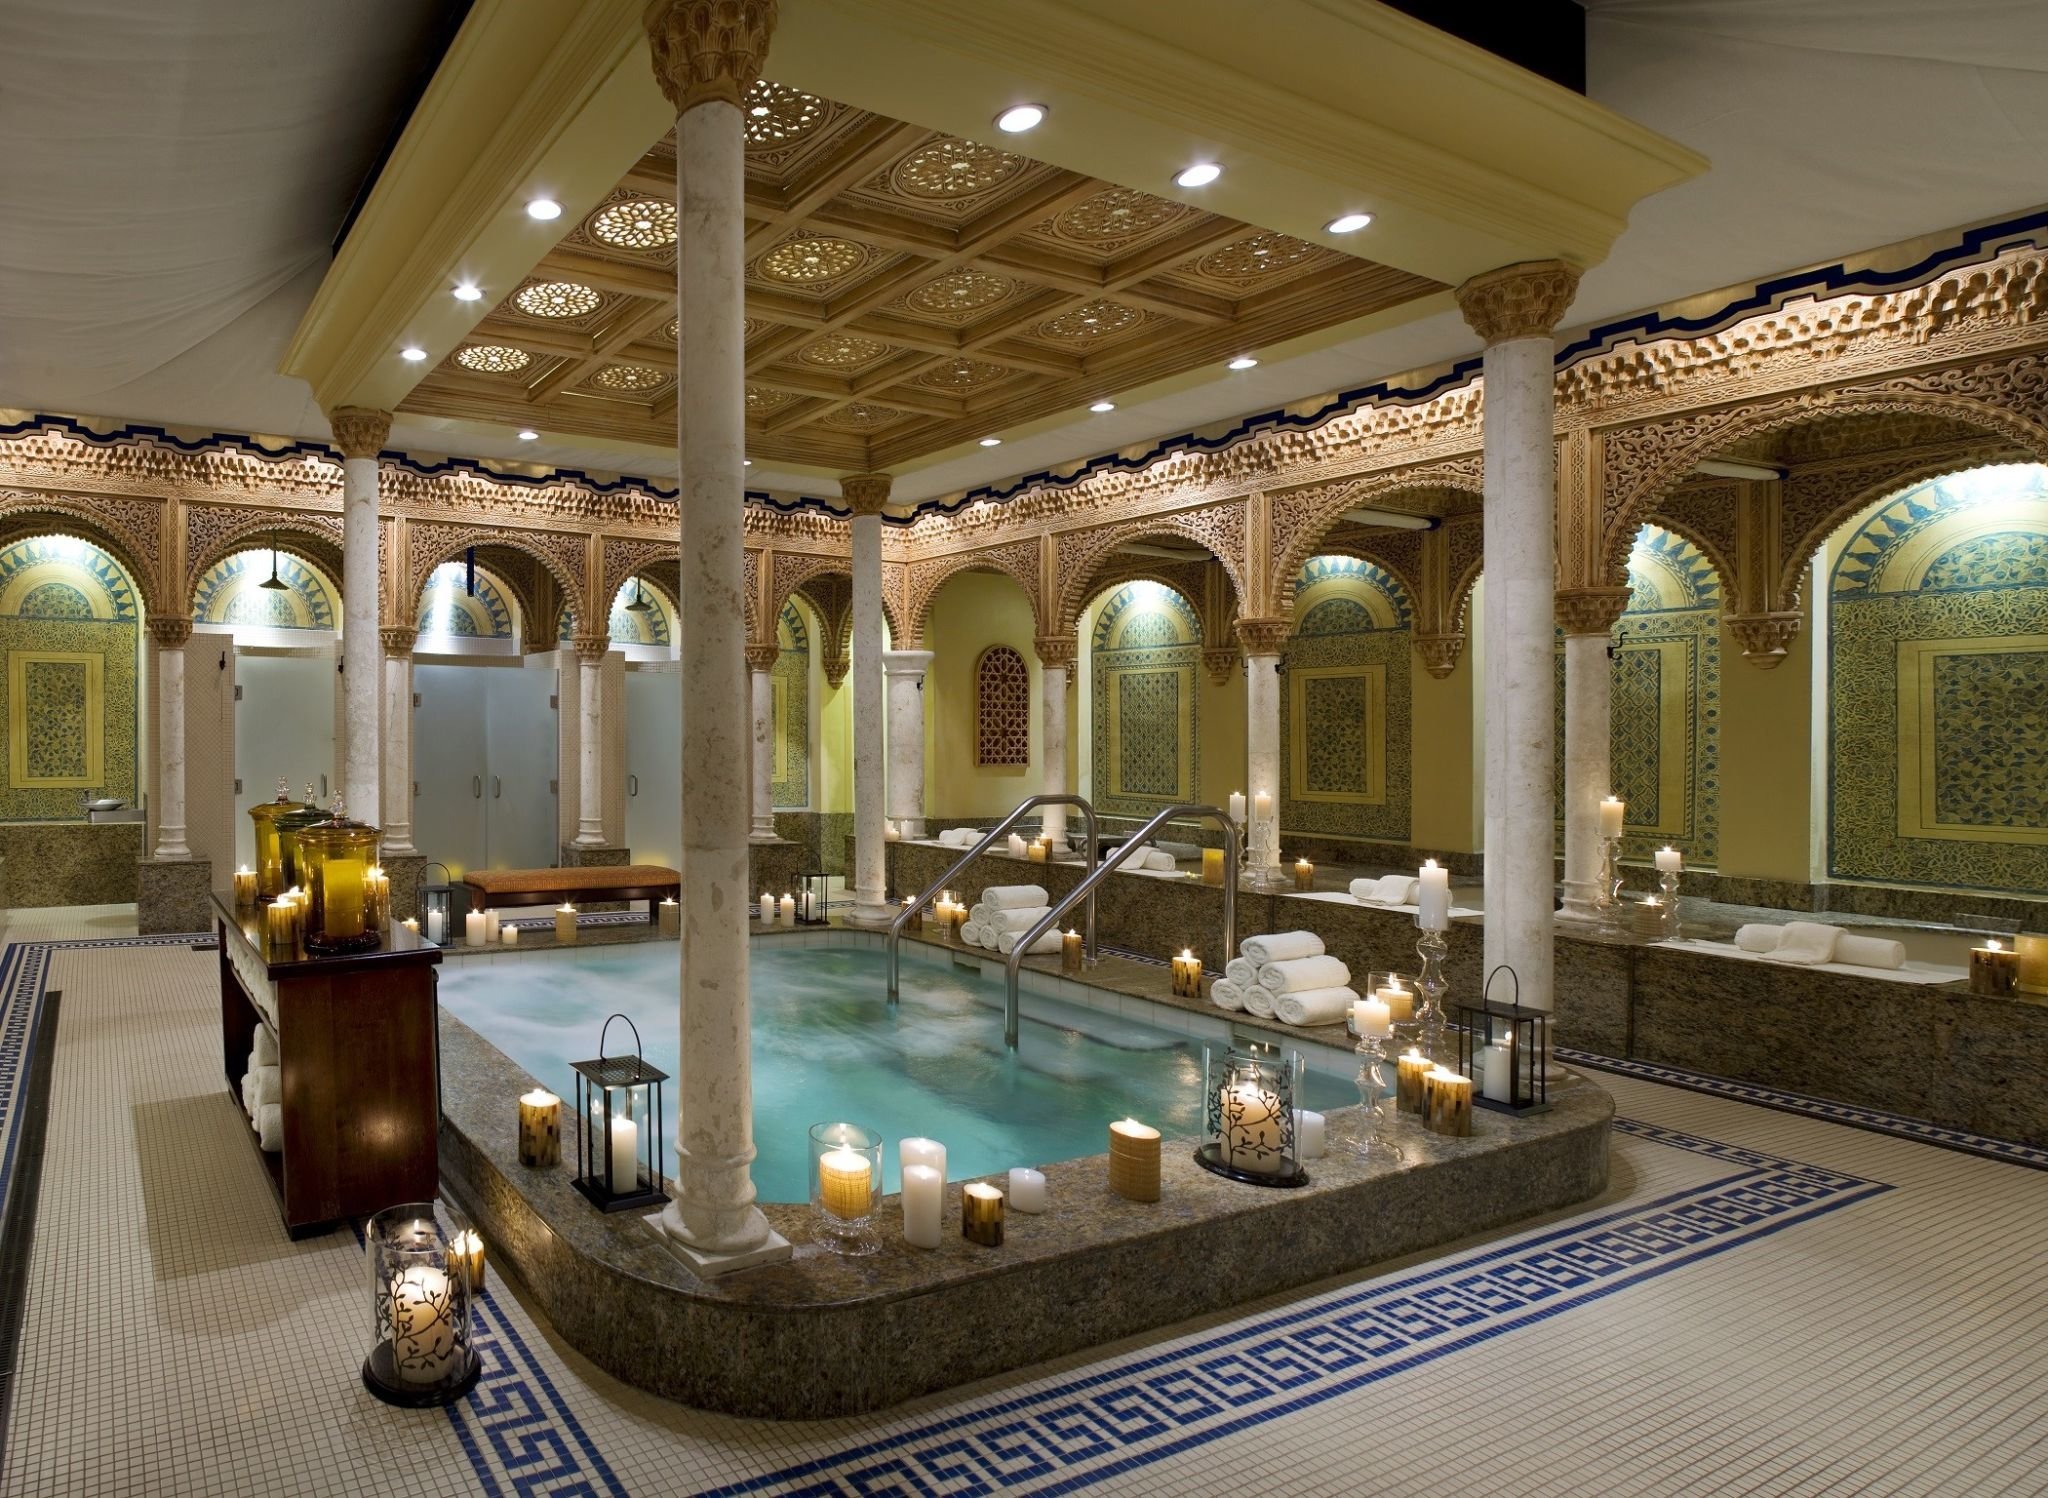 LuxeGetaways Has Three Relaxing Ways To Spa this October